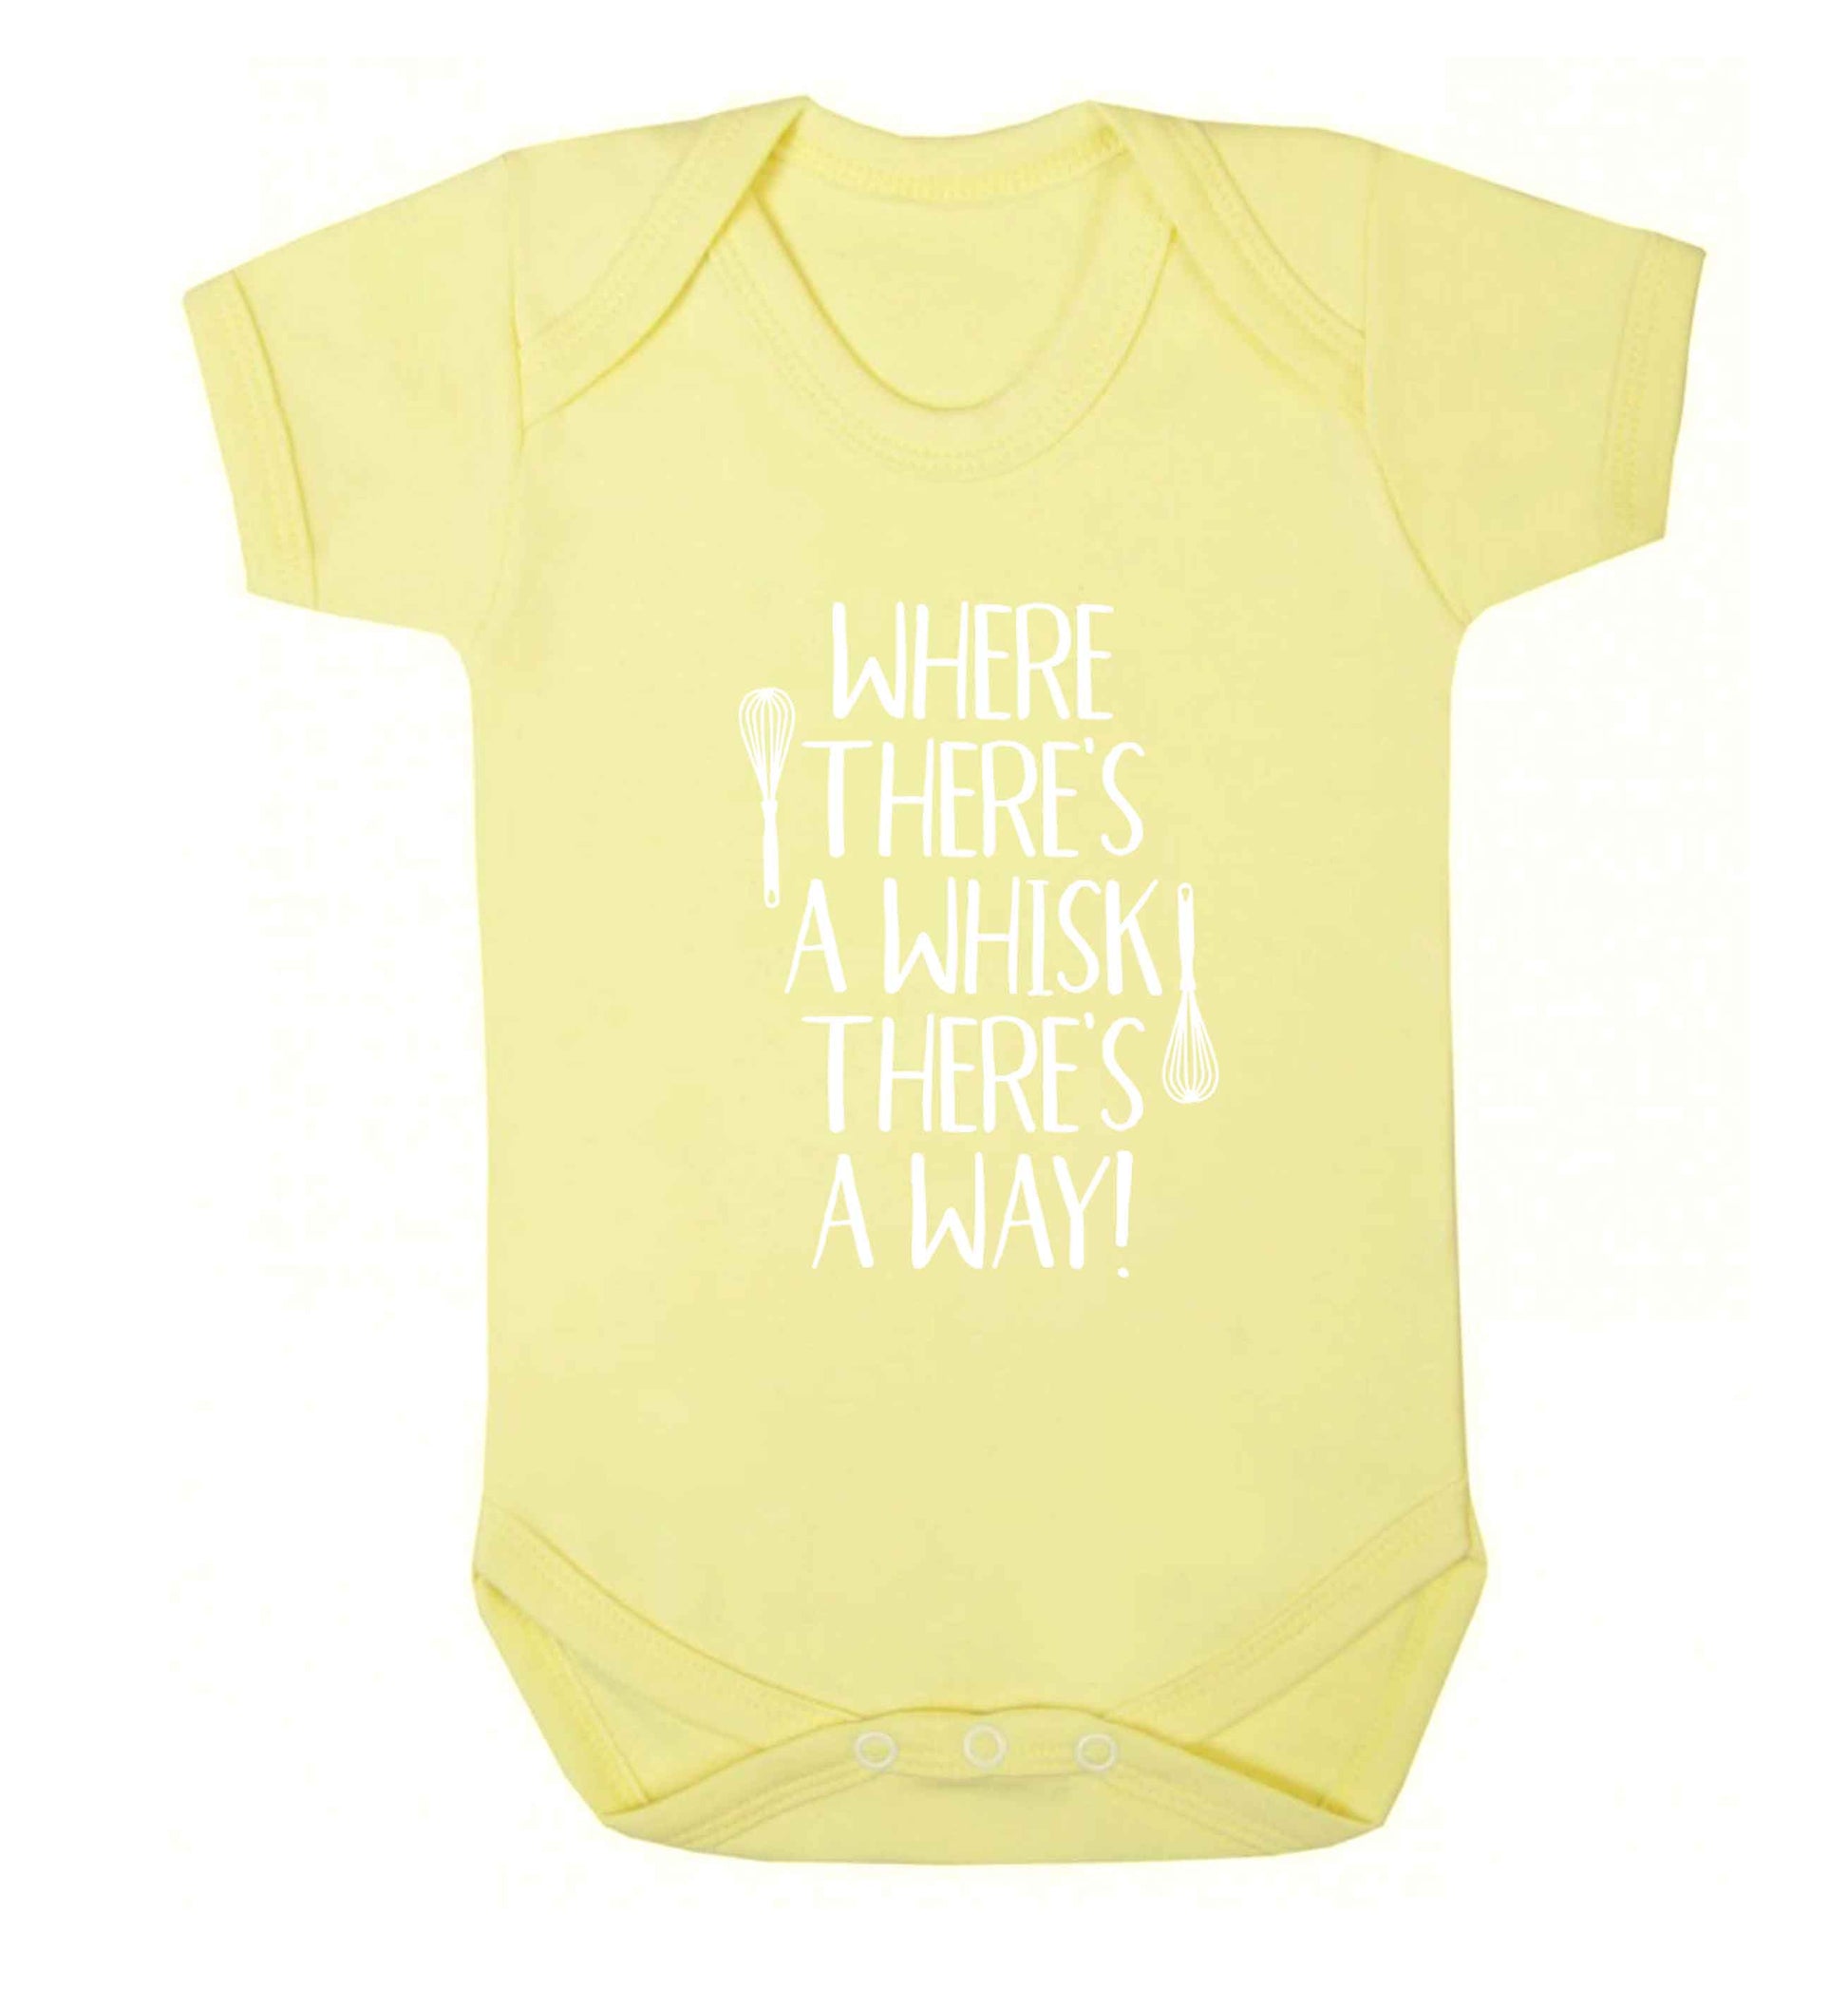 Where there's a whisk there's a way Baby Vest pale yellow 18-24 months